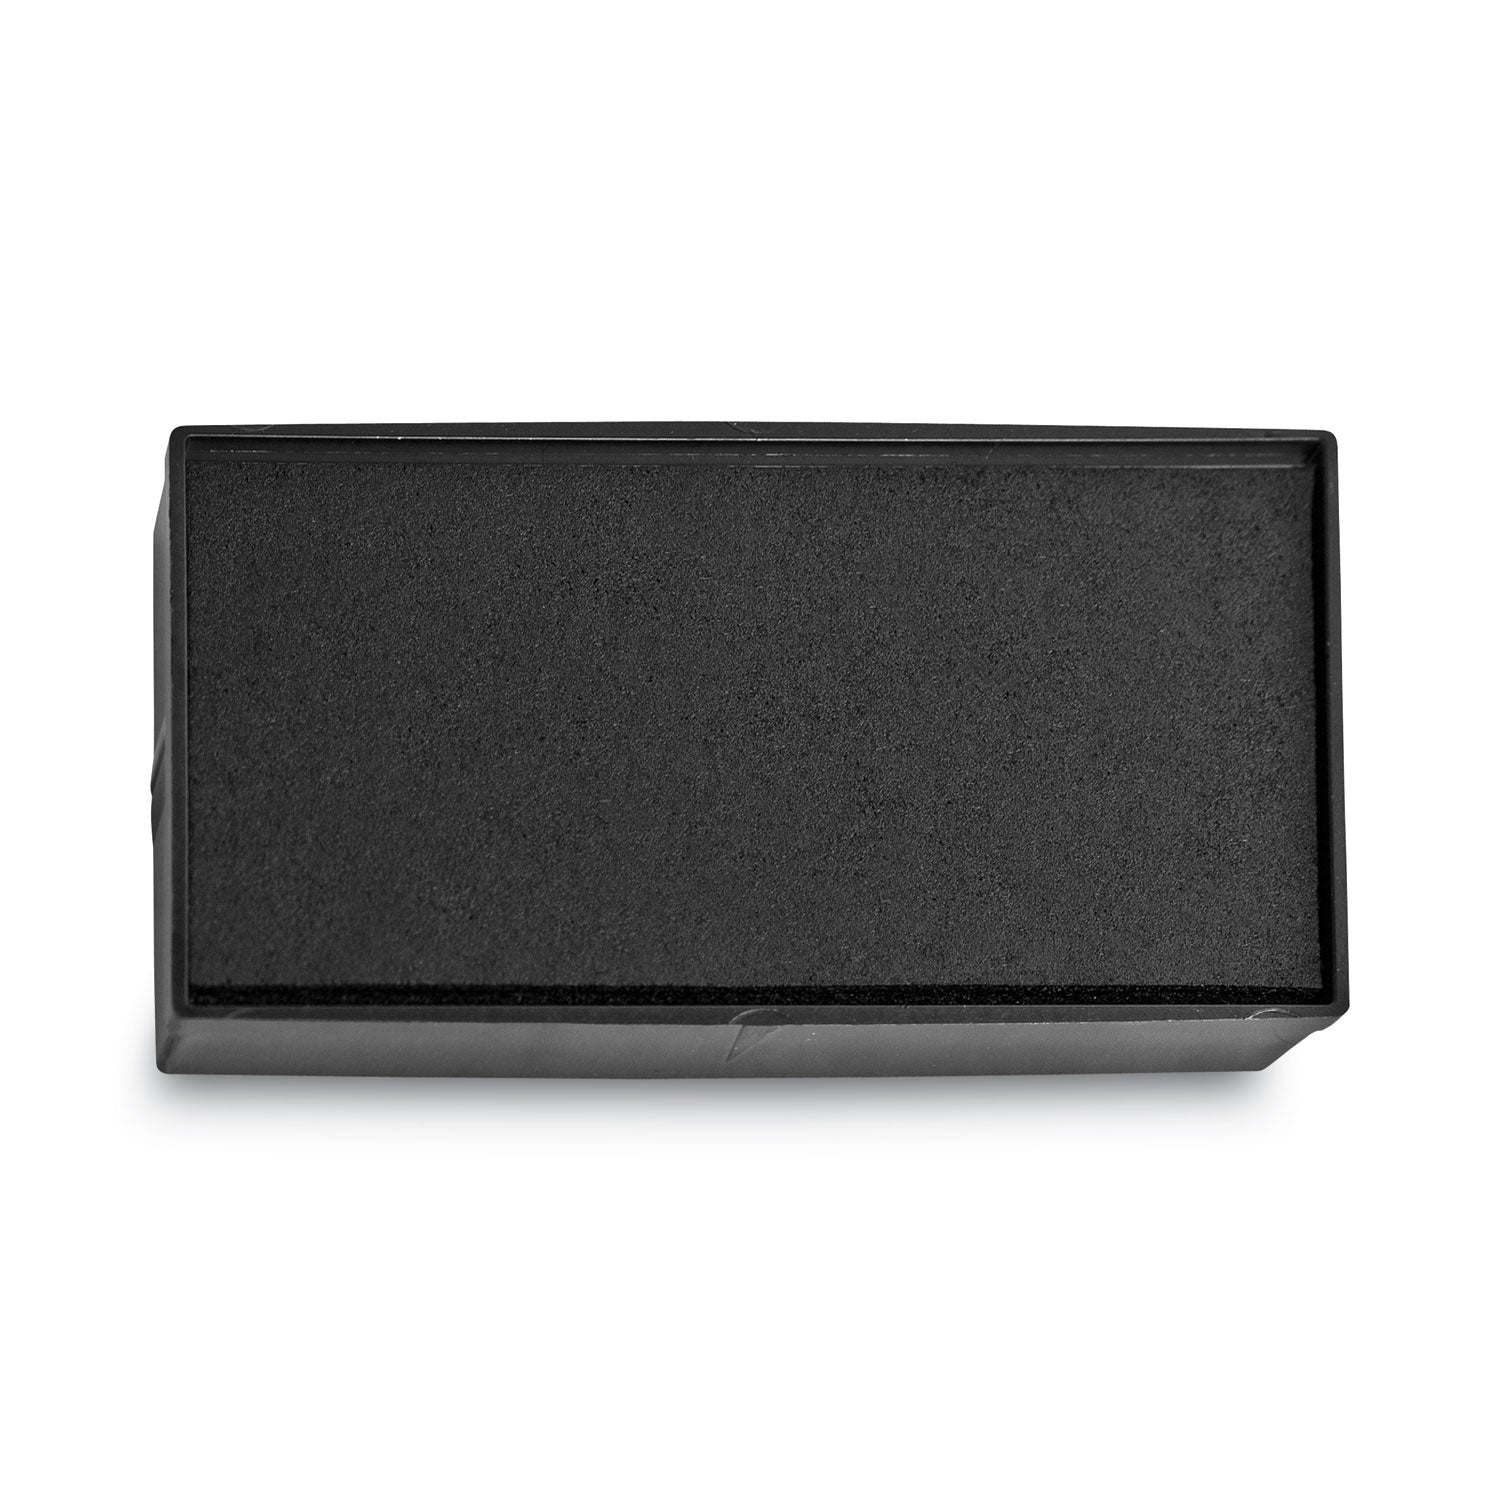 Replacement Ink Pad for 2000PLUS 1SI50P, 2.81" x 0.25", Black - 